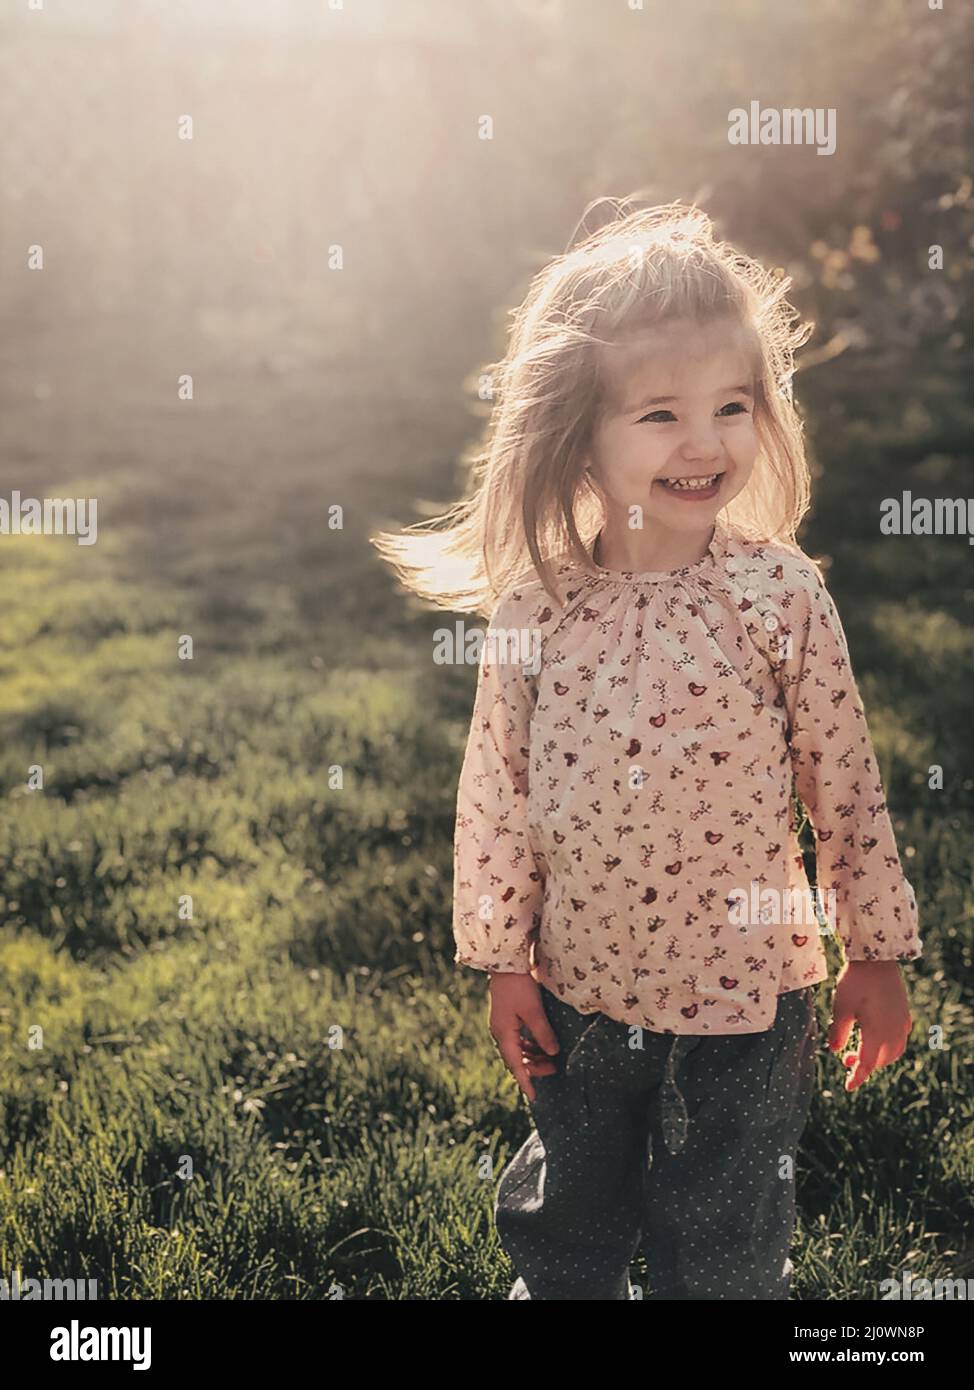 Close up photo of smiling cute little girl of 3-4 years old with blond fluffy hair stands outdoor Stock Photo